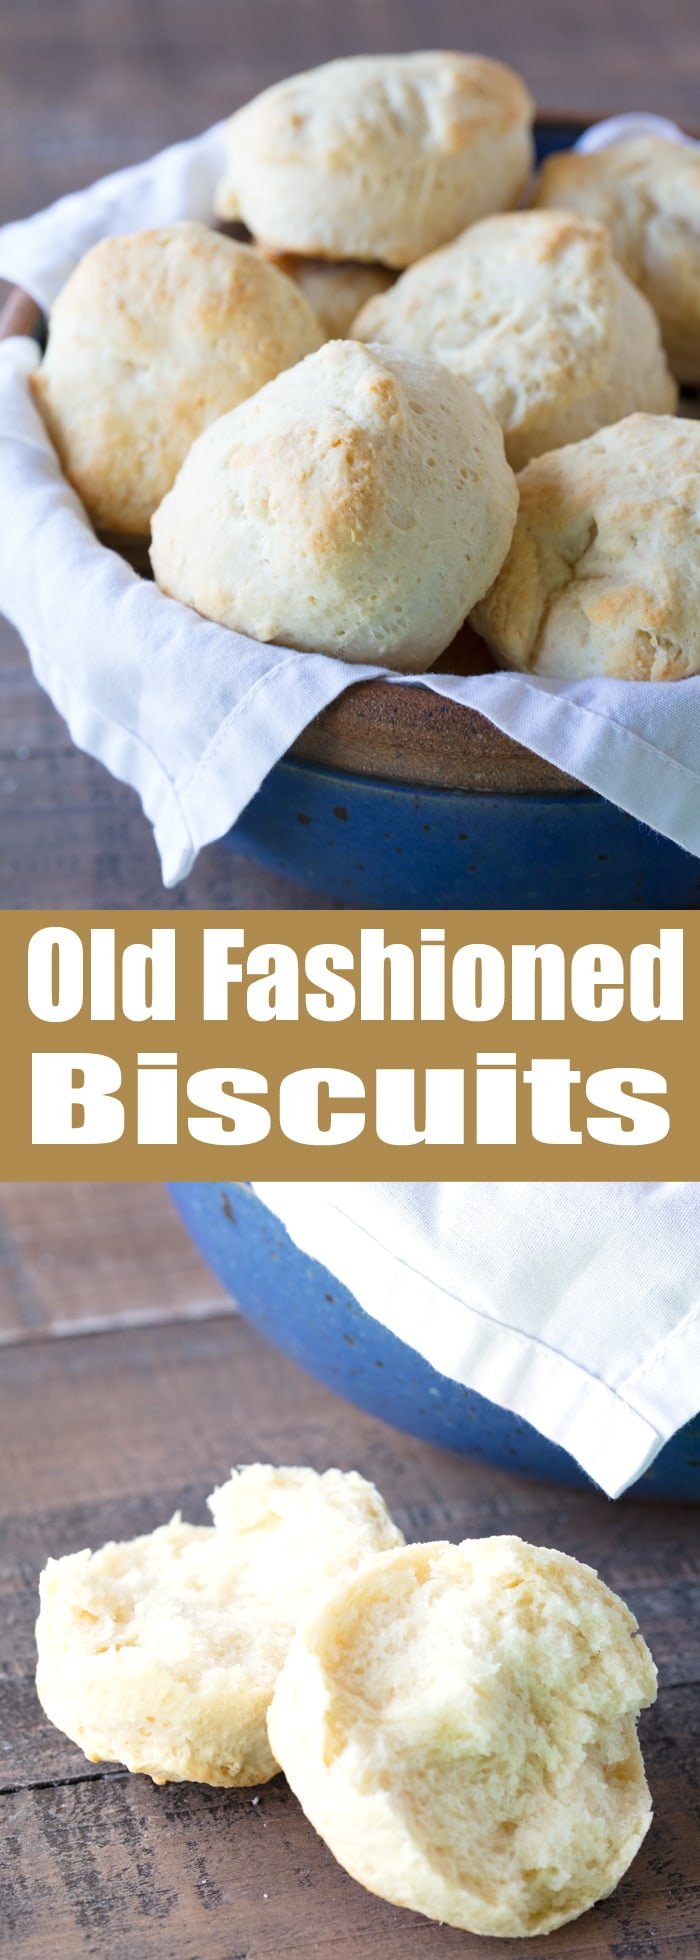 Nothing beats warm flaky old fashioned biscuits straight from the oven. These biscuits are easy to make and require just 6 ingredients. Try this fool proof old fashioned method!